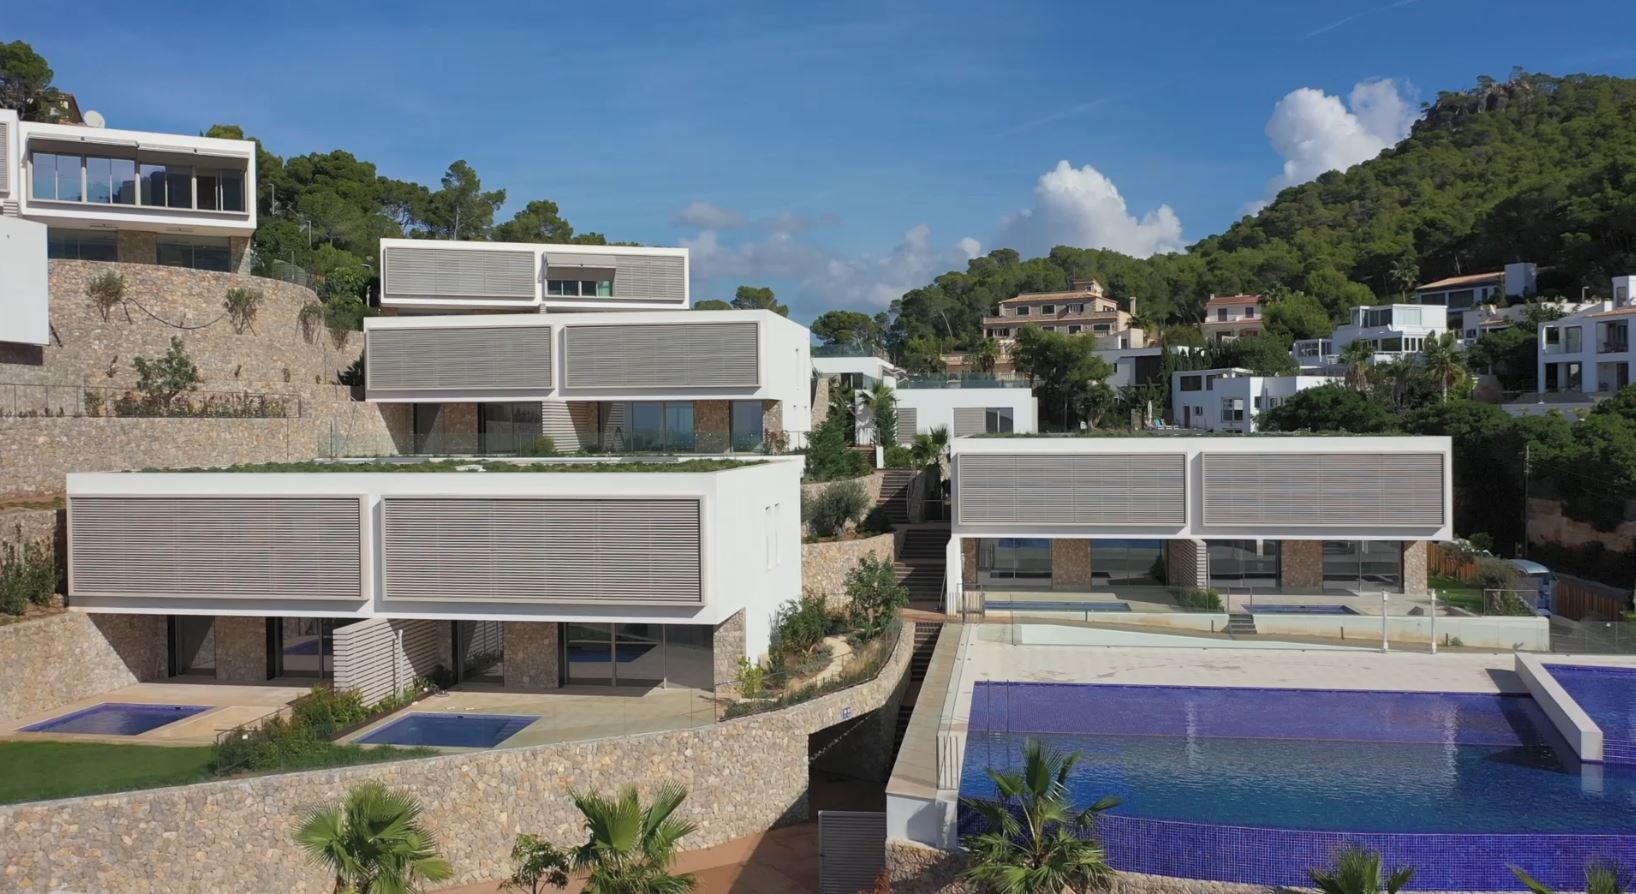 Some of the villas currently being delivered at the AEDAS Homes development New Folies in Andratx, Mallorca.